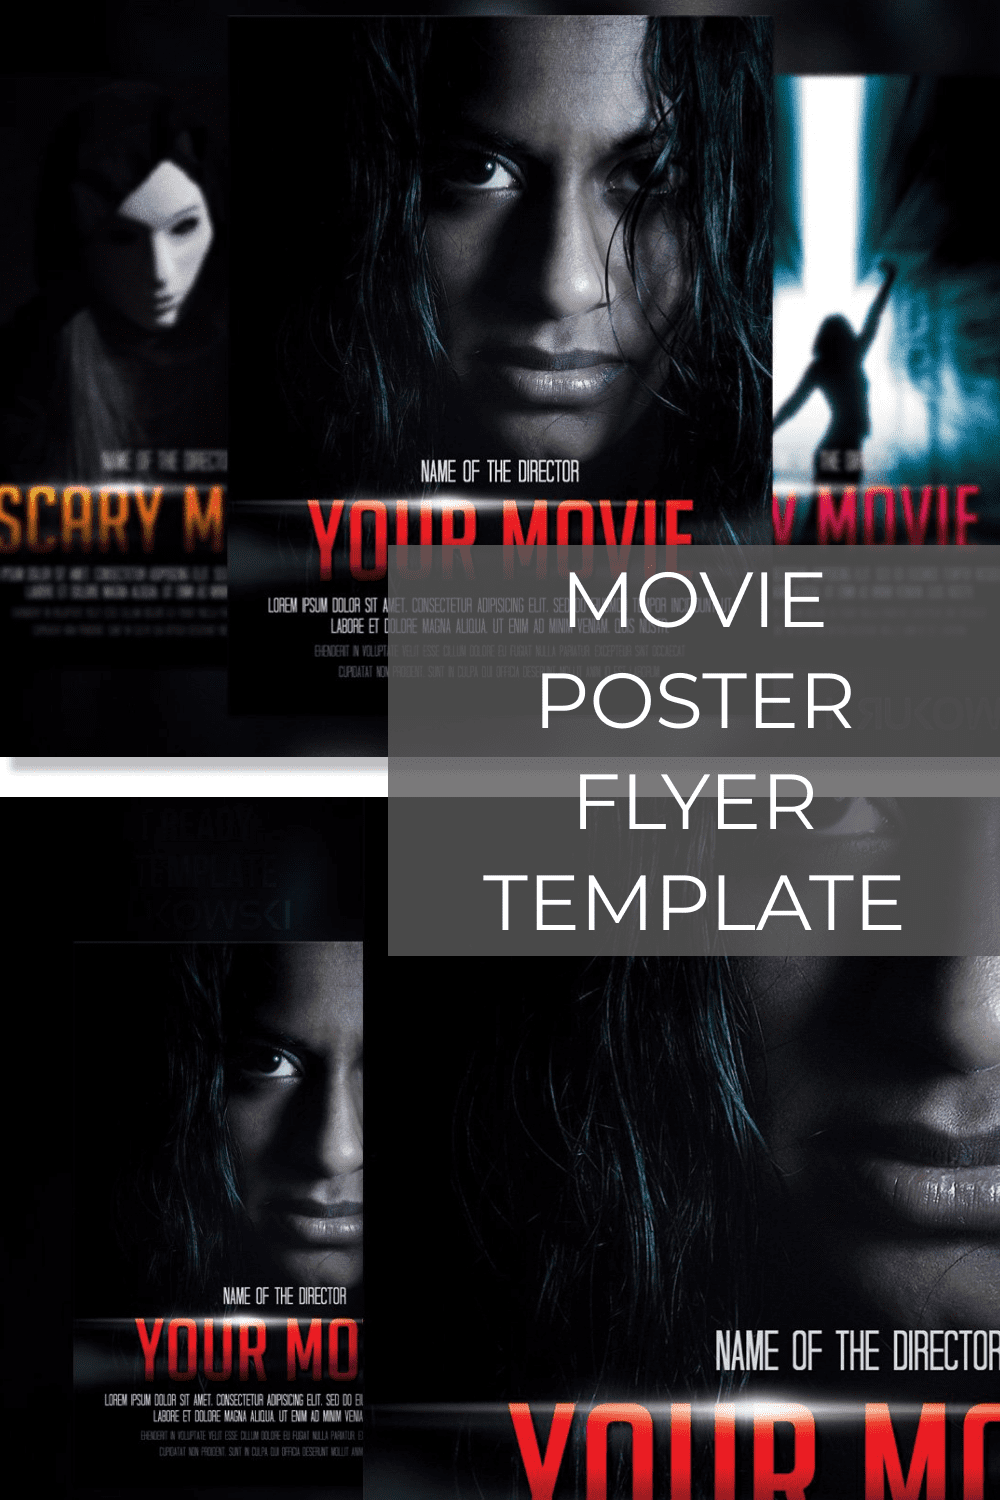 Movie Poster Flyer Template pinterest image.